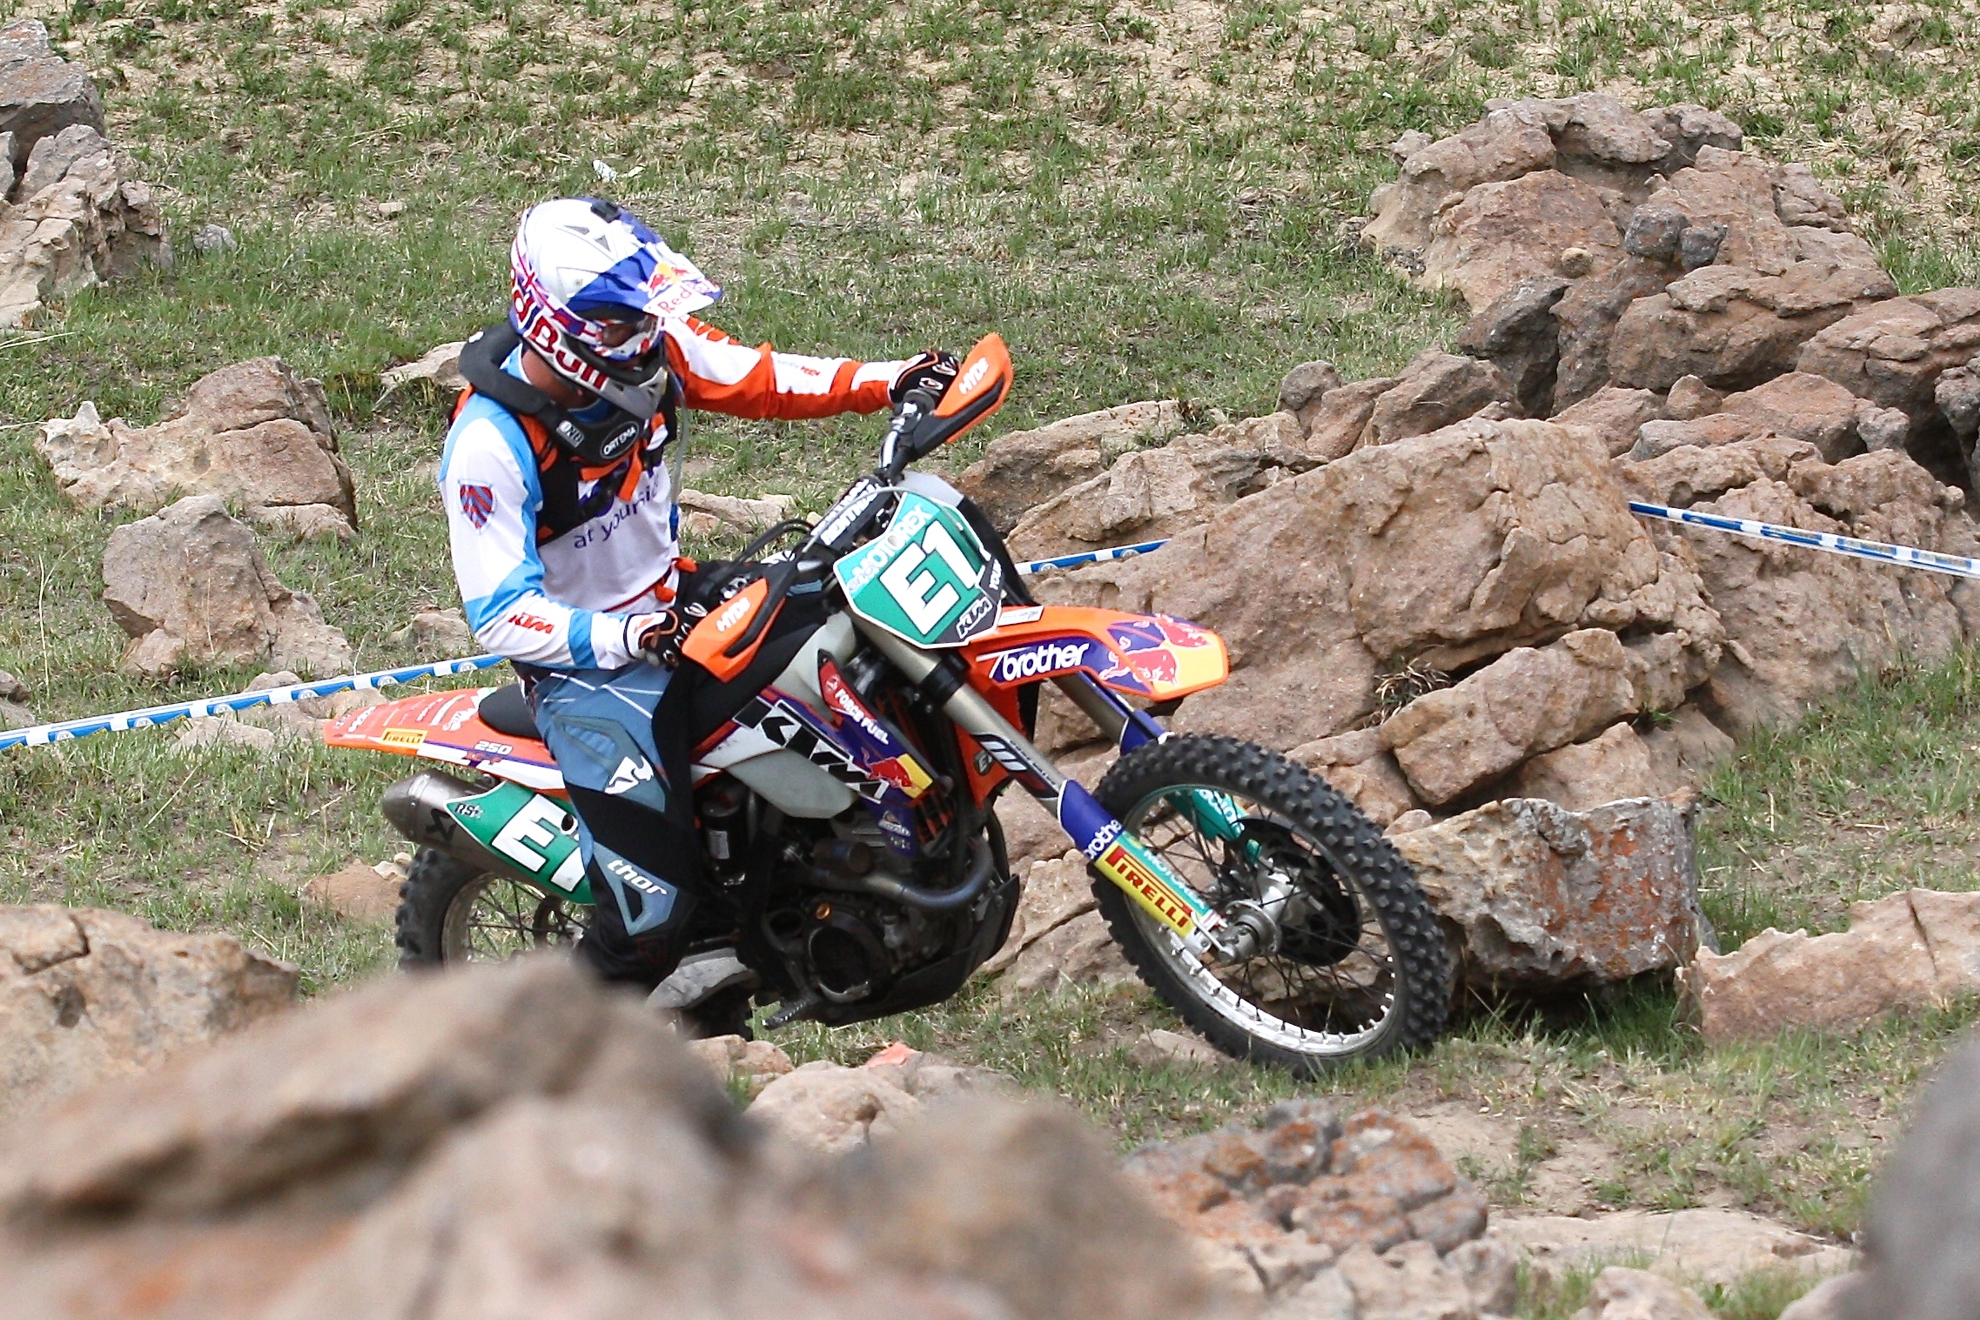 KTM Motorcycle Riders, and Brothers Win Young South African and E1 Enduro Championship Twice